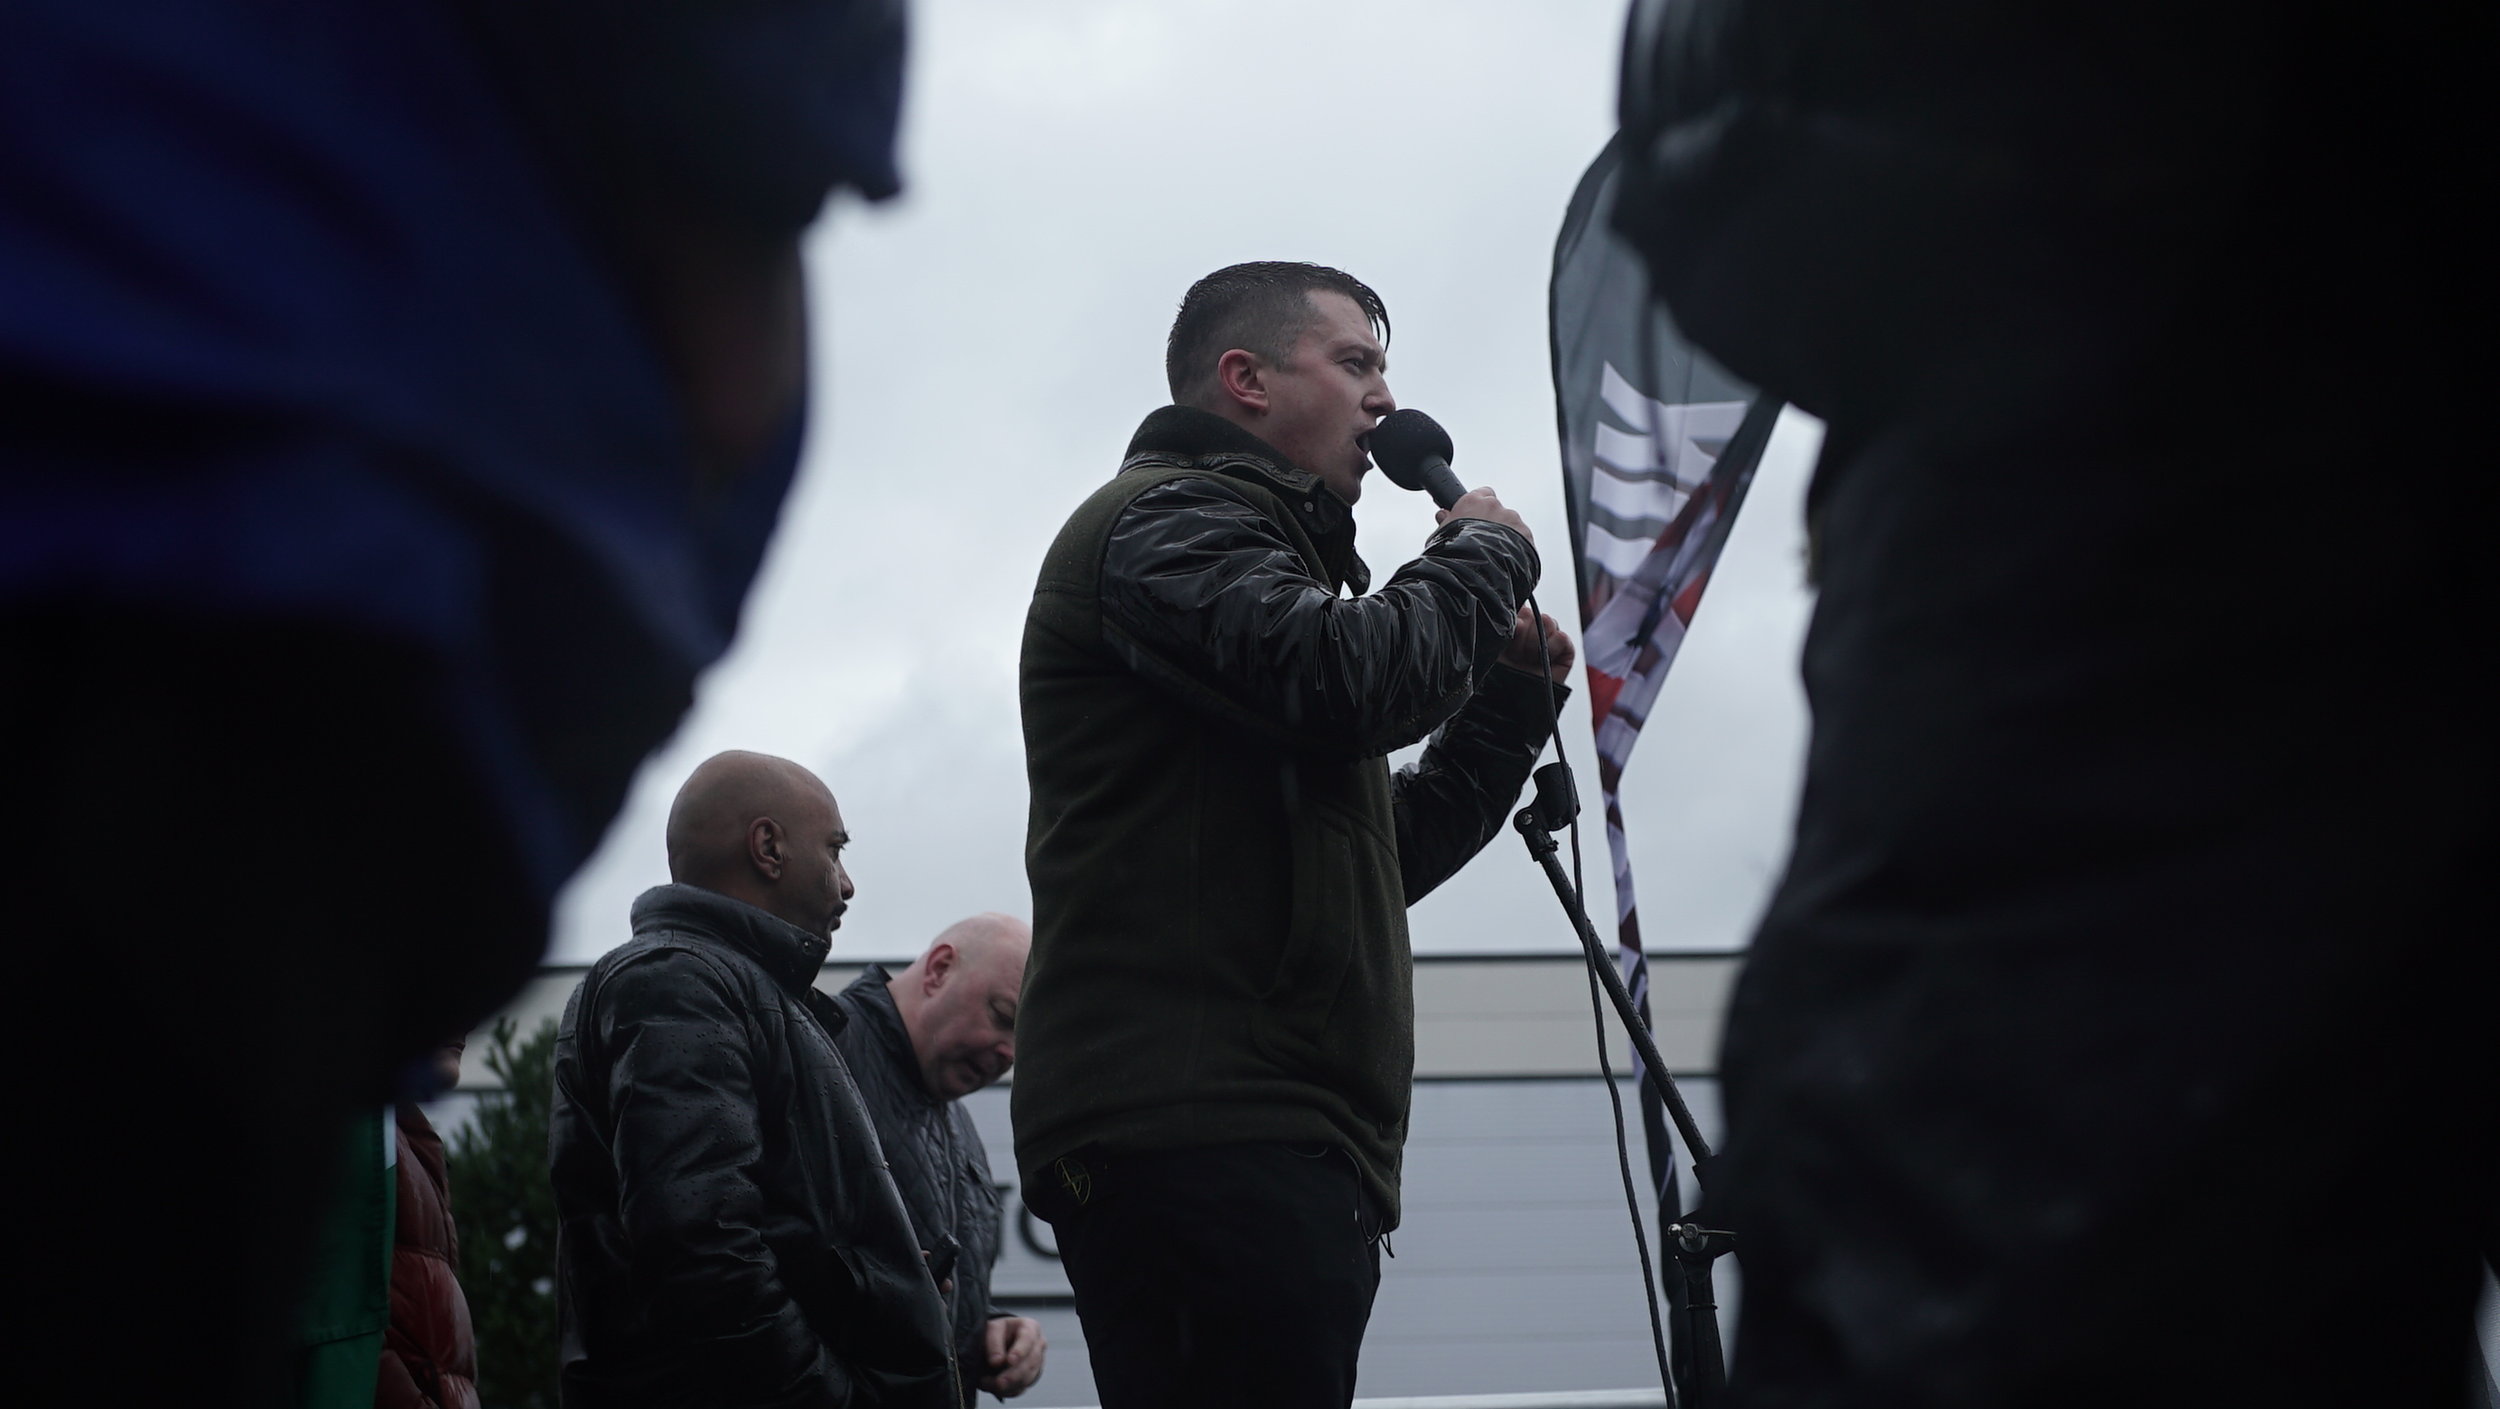  Far-right activist Tommy Robinson speaks to crowds at PEGIDA silent march.  Photo by Sarah McClure  